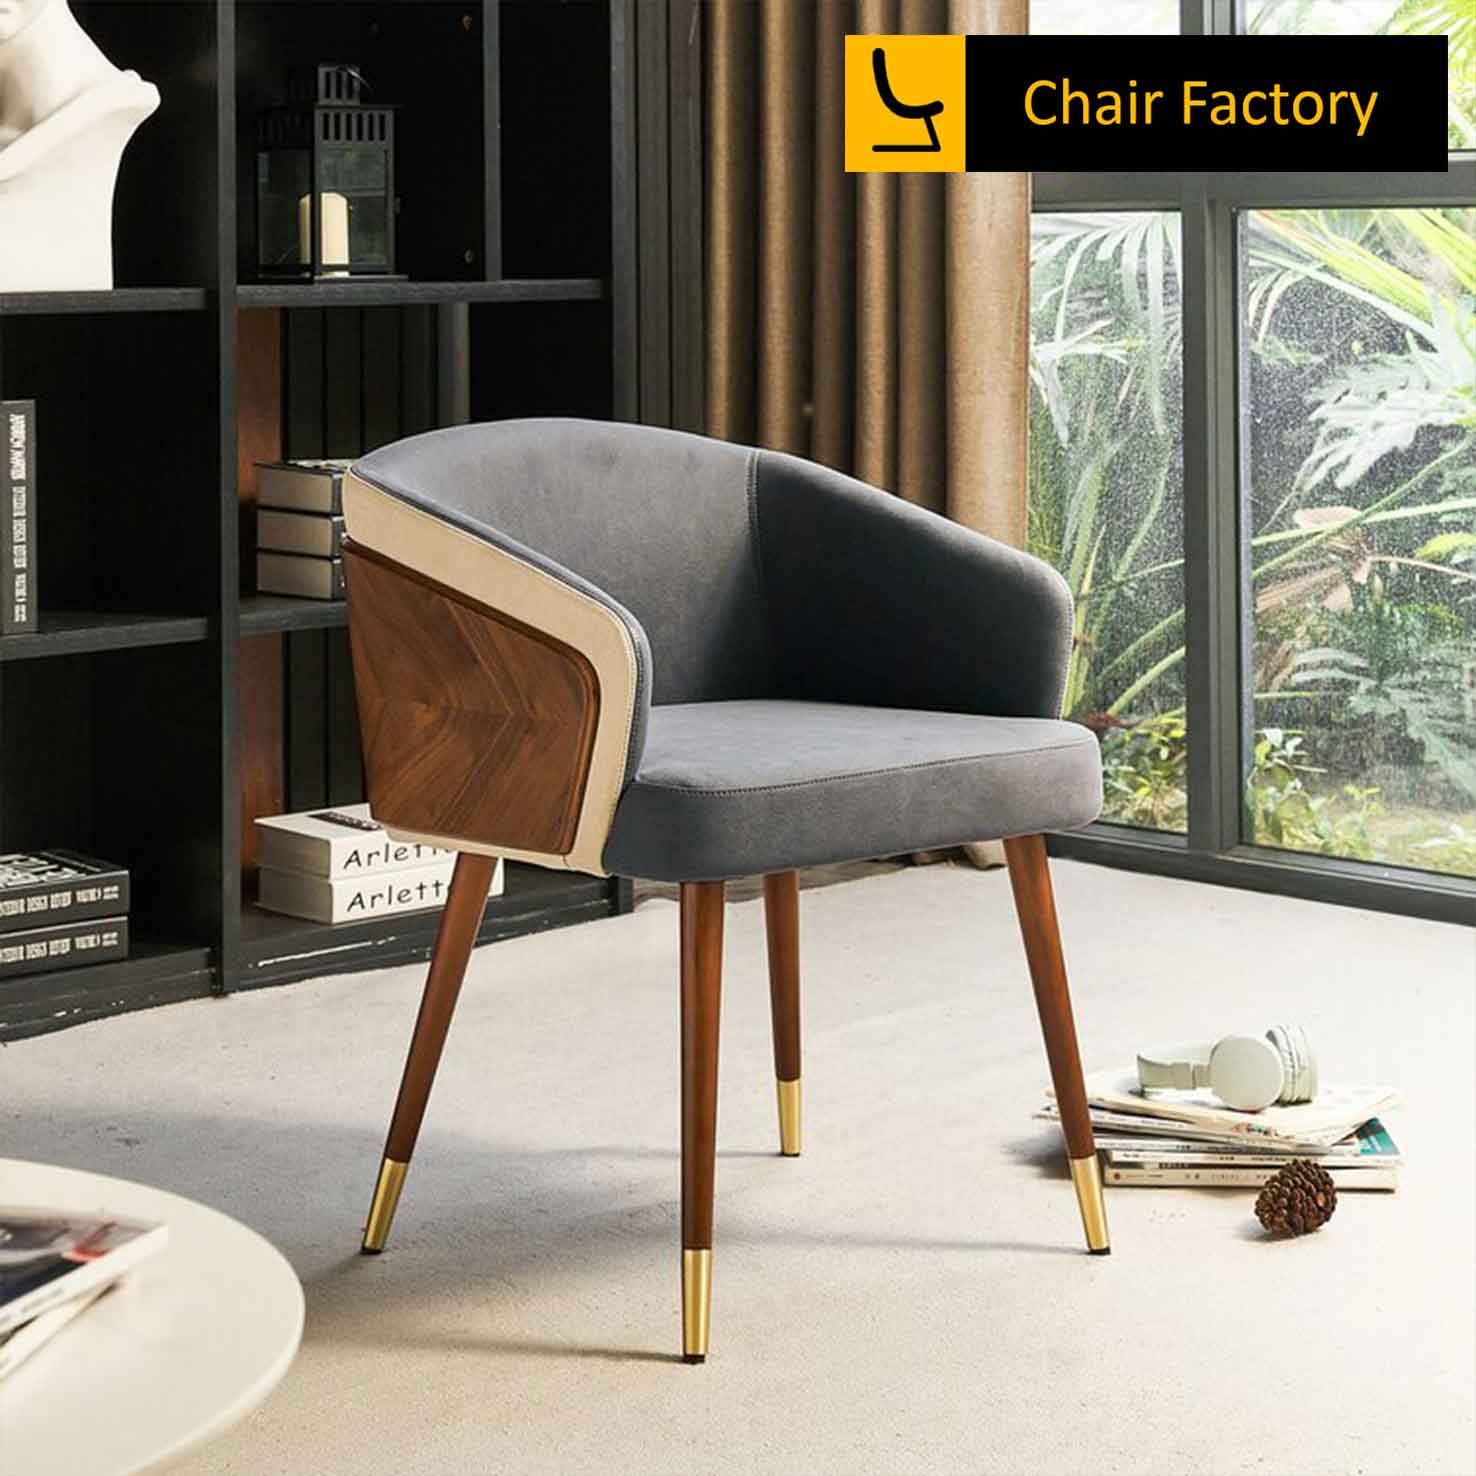 Veov gray gold legs chair accent chair with gray color | Chair Factory